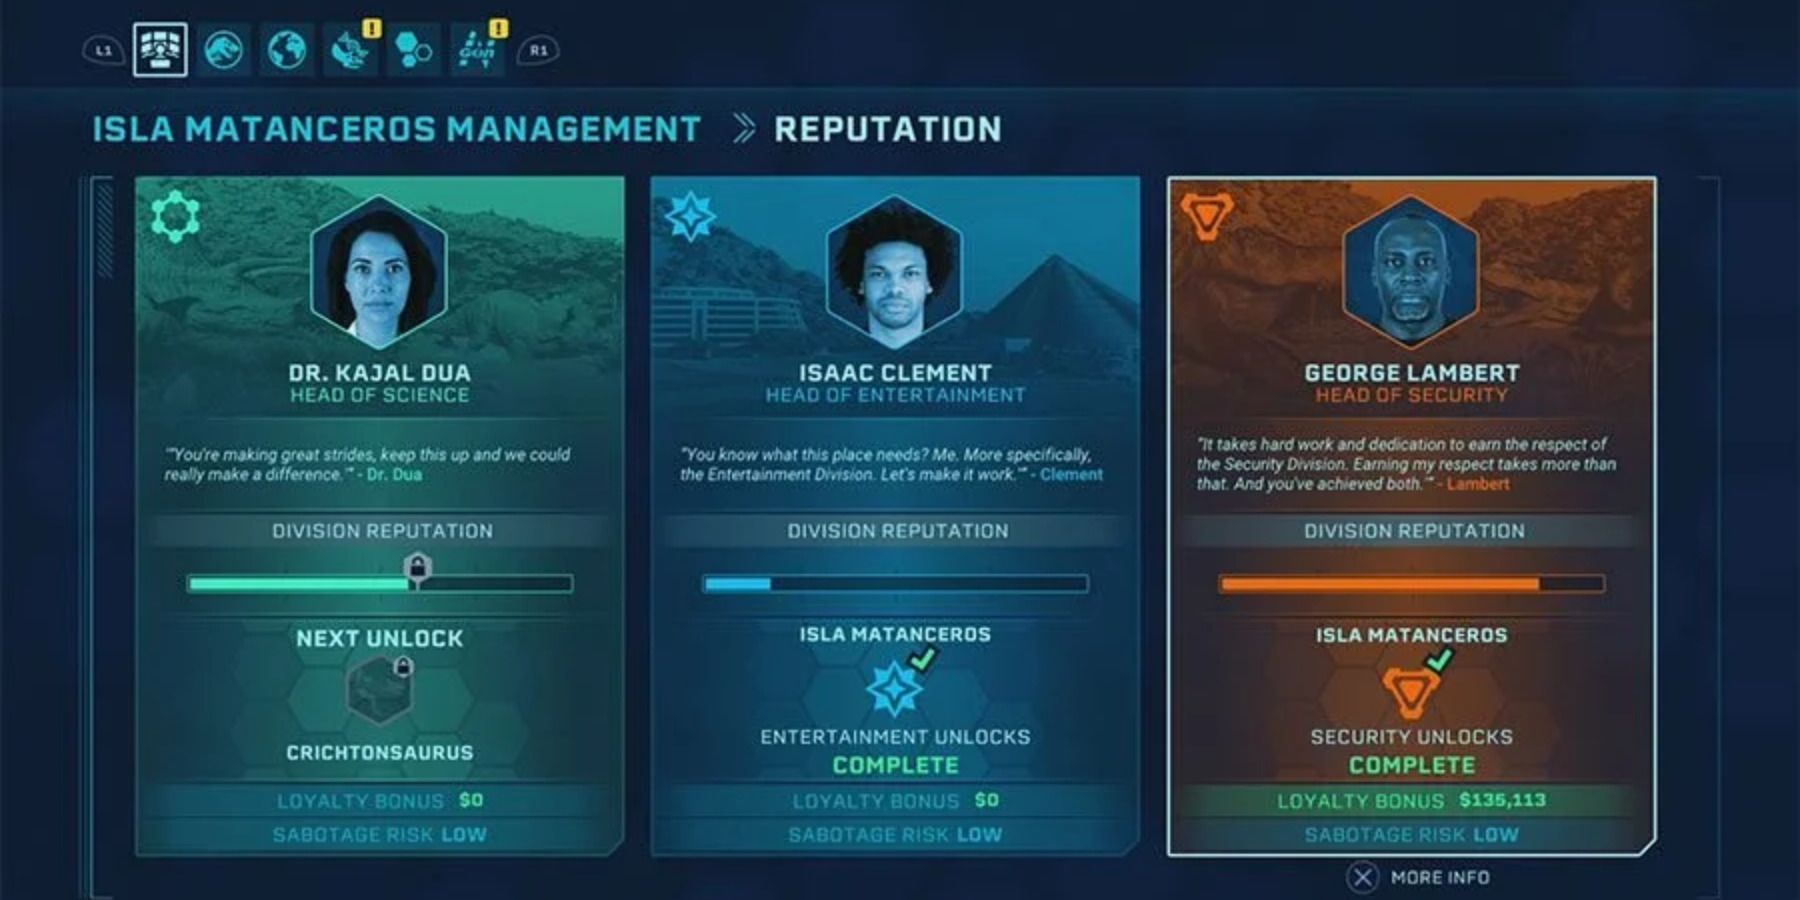 The Division Groups in Jurassic World Evolution 2